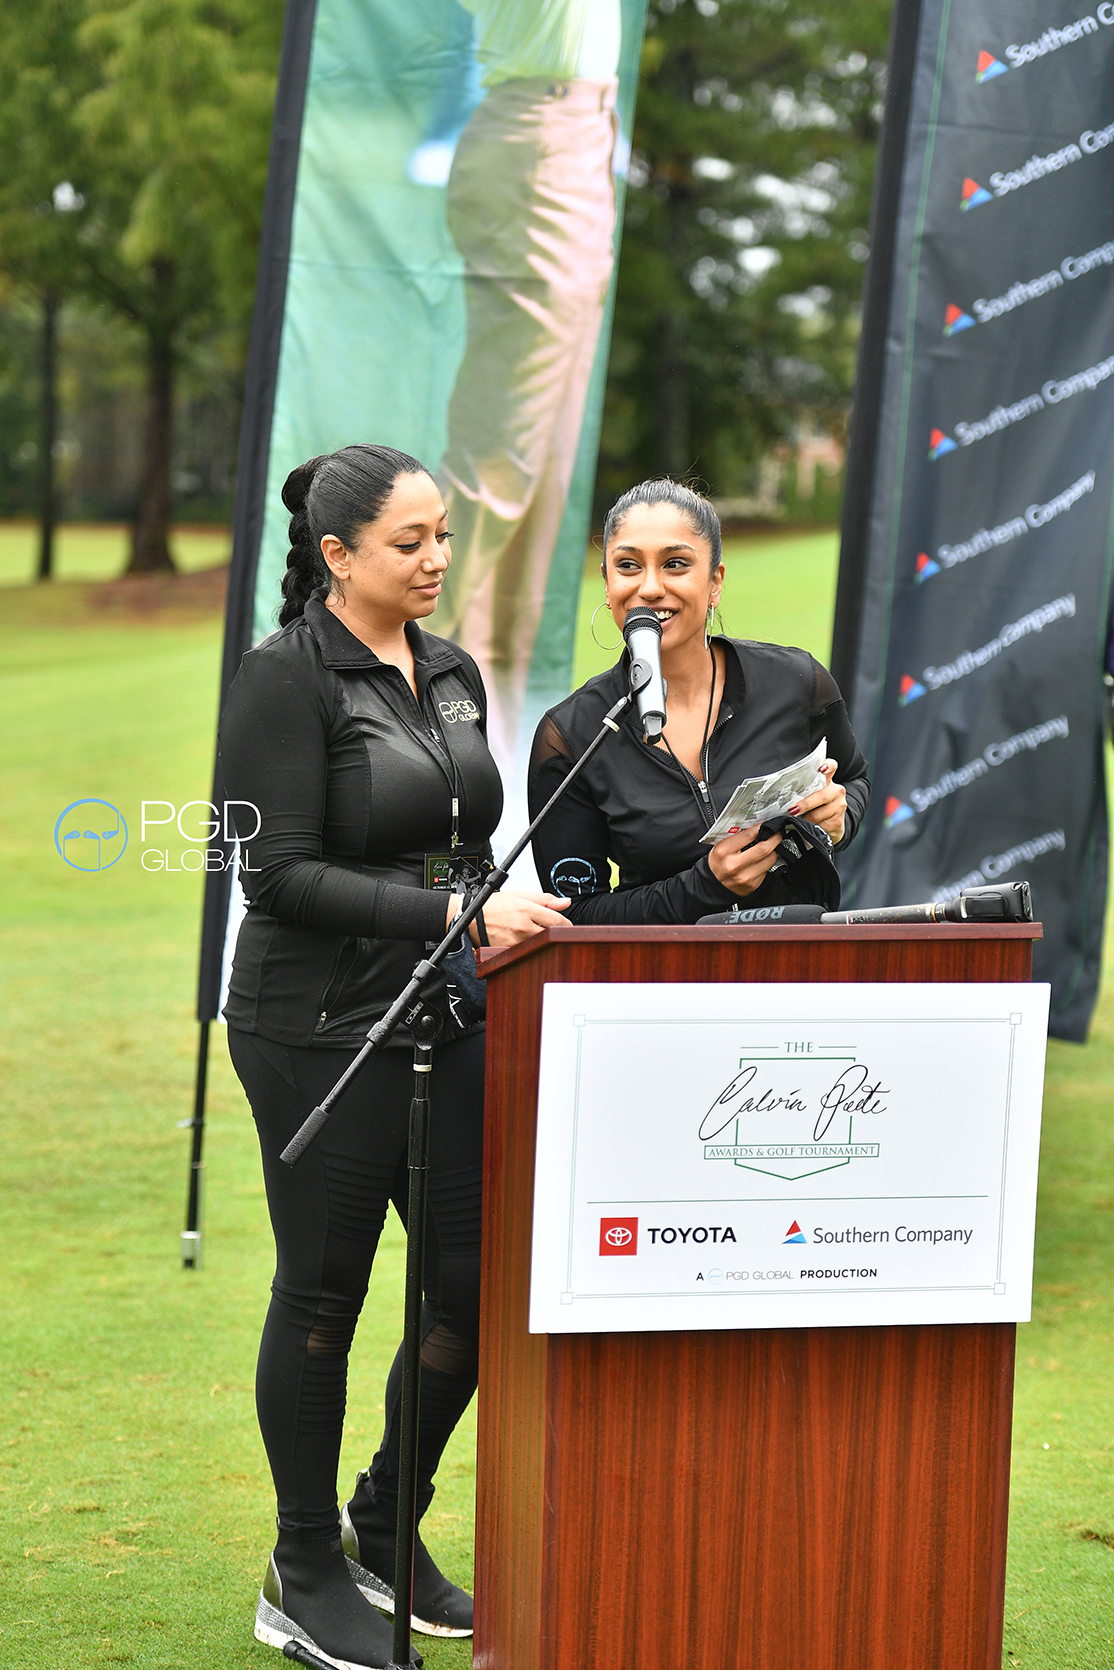 Nisha and Seema Sadekar welcome guests to the Calvin Peete Opening Ceremonies presented by Southern Company.